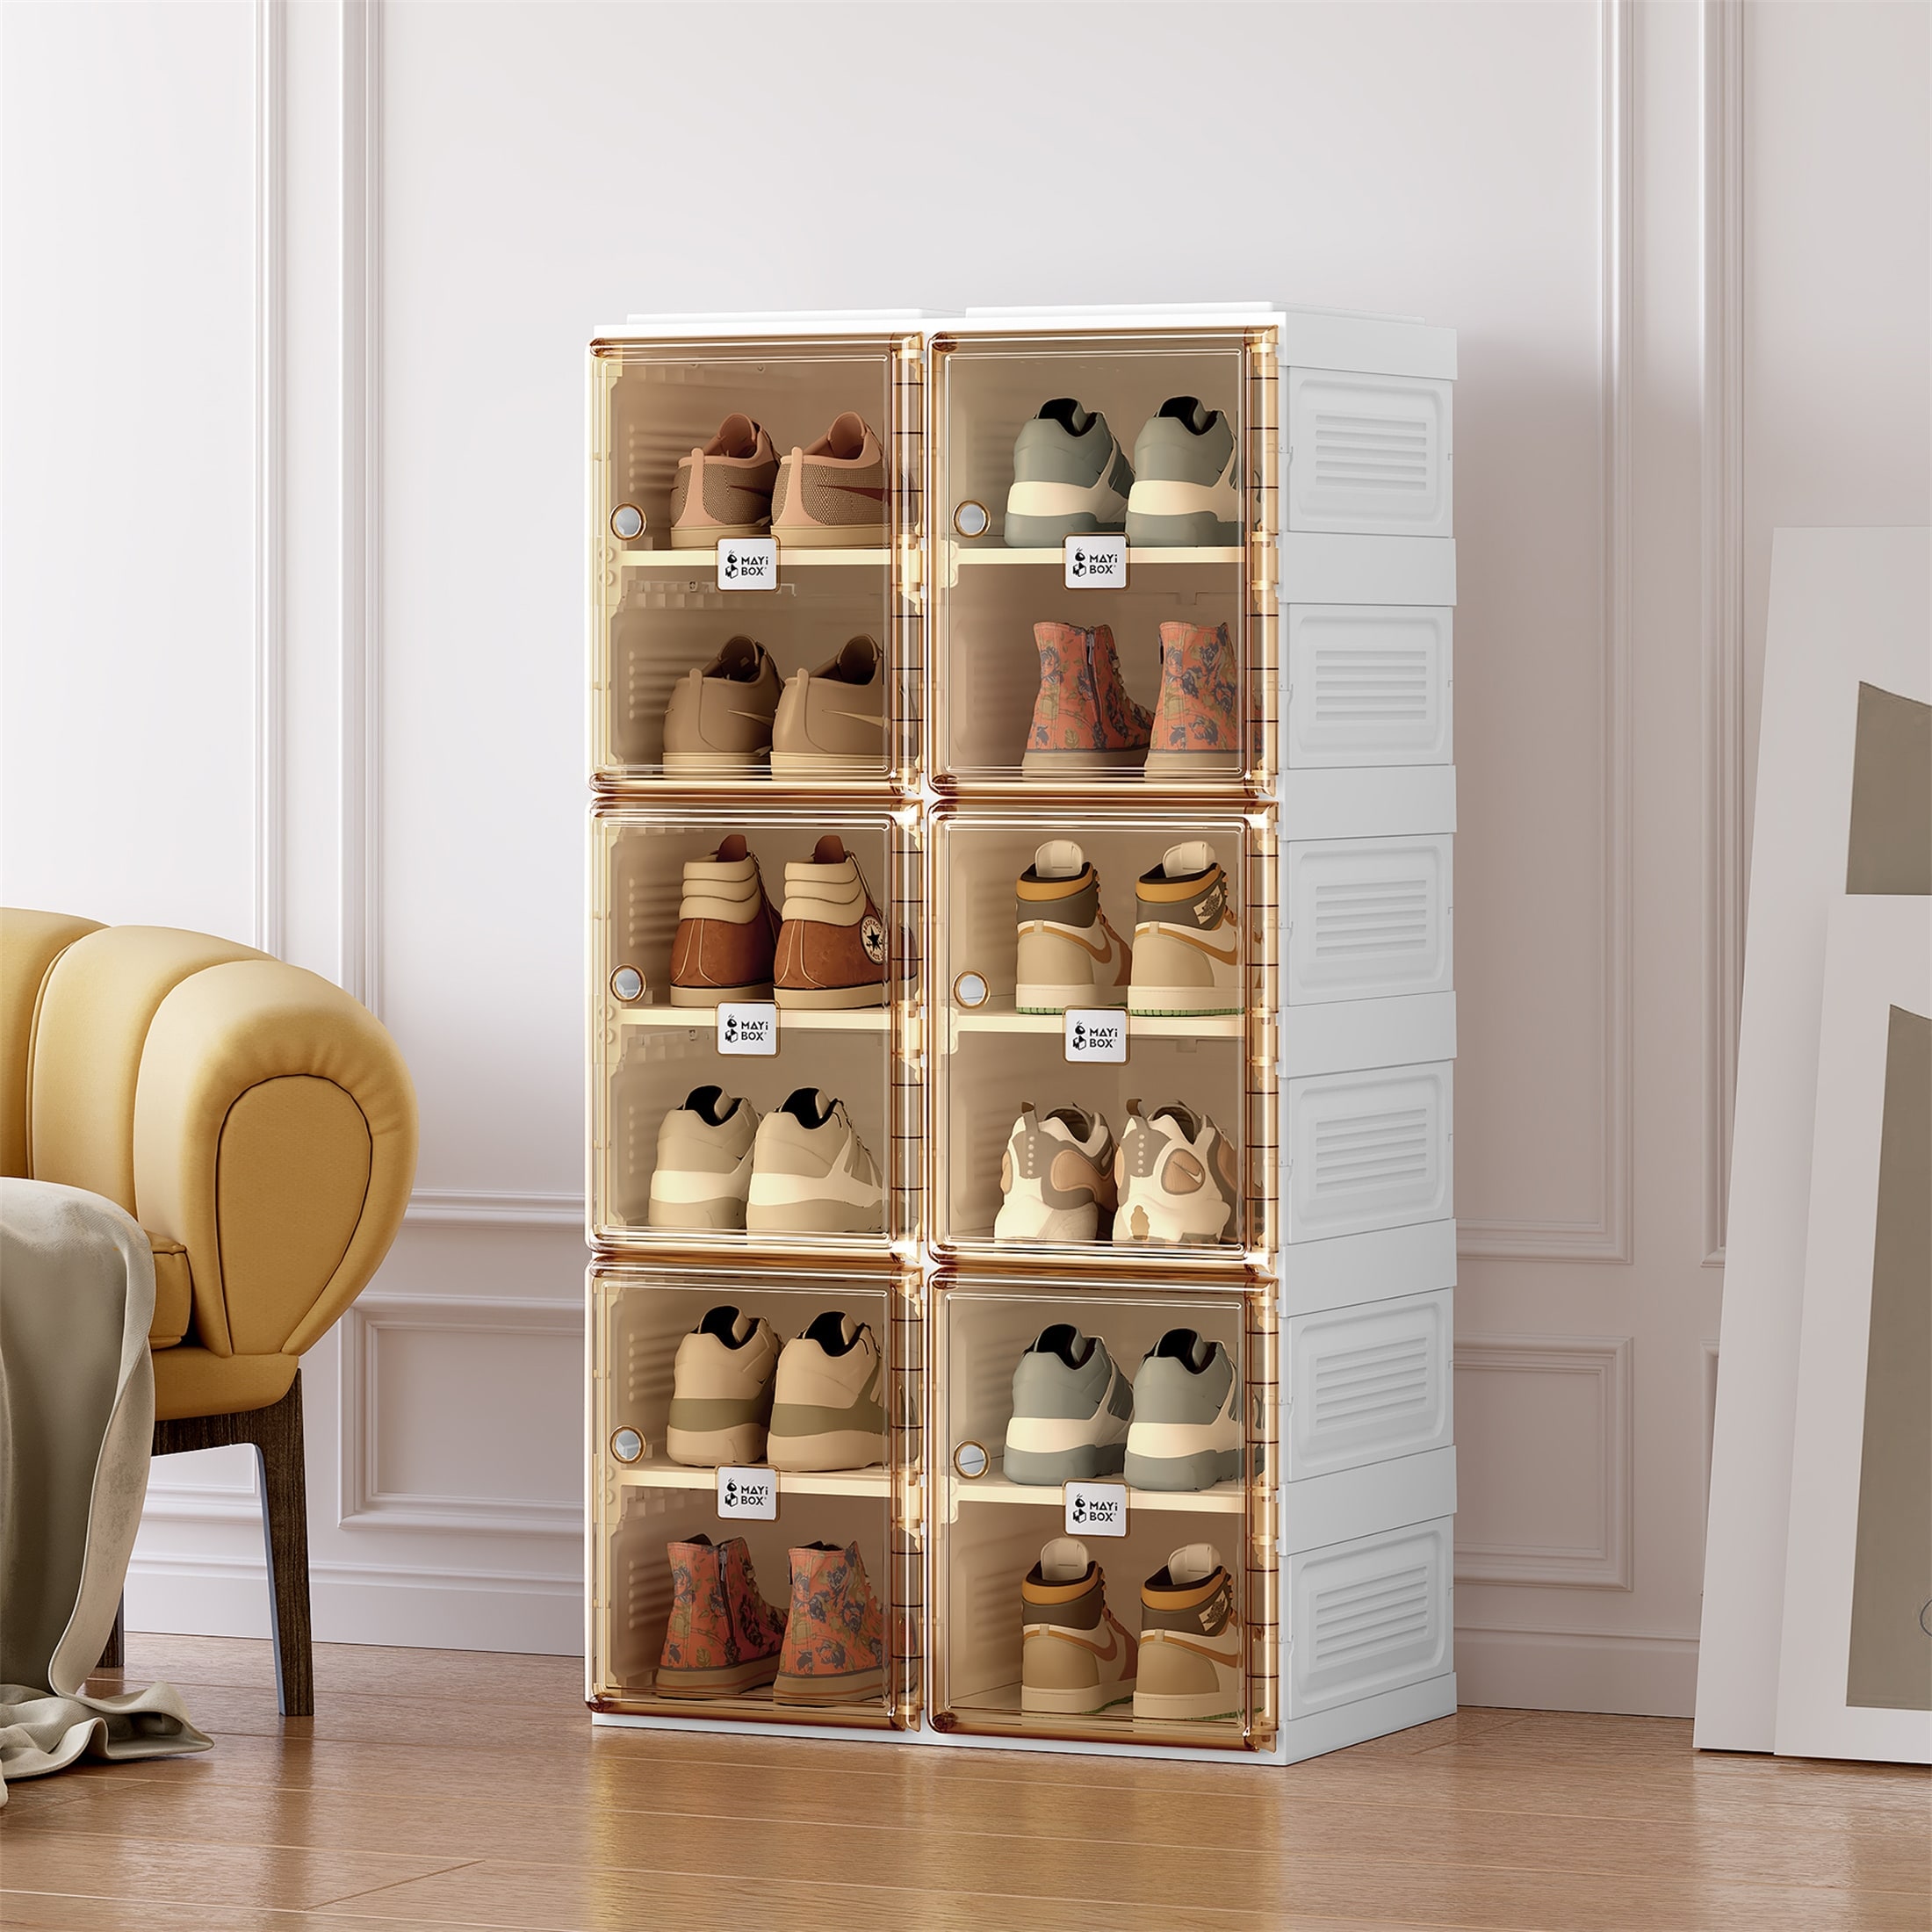 https://ak1.ostkcdn.com/images/products/is/images/direct/277451cae805a31945e1f2a73cf181c14e57309c/Shoe-cabinet-Stackable-Storage-Organizer-Cabinet-Door-and-Shelves.jpg